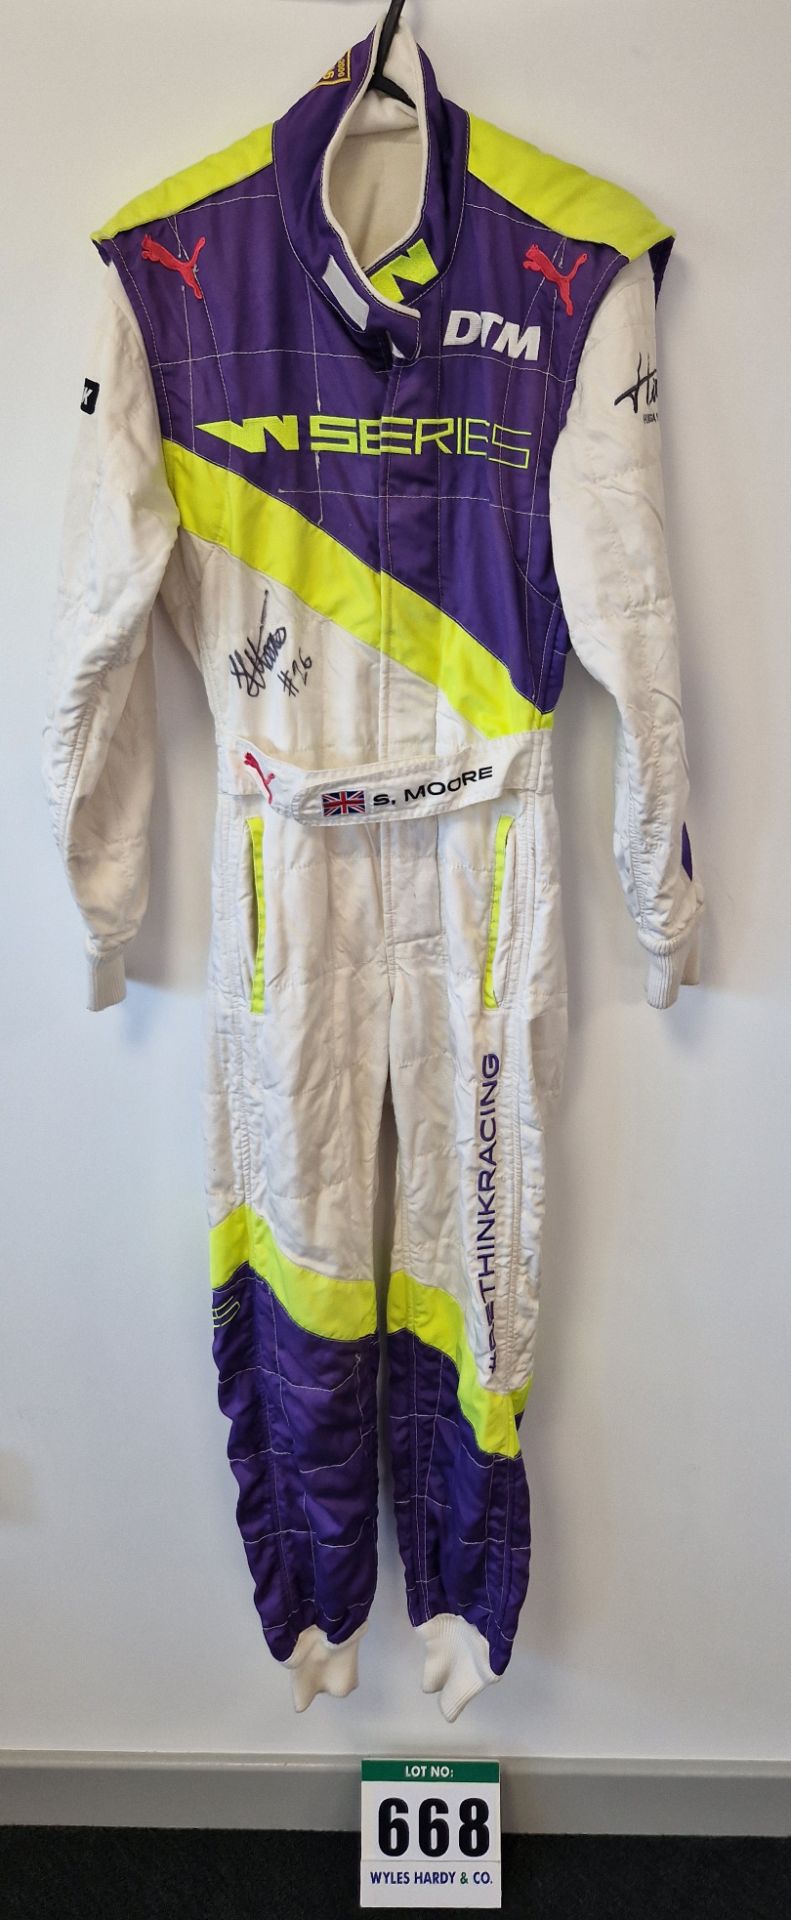 One PUMA FIA approved Race Suit (Size - Made to Measure) worn by Sarah Moore and signed by her with